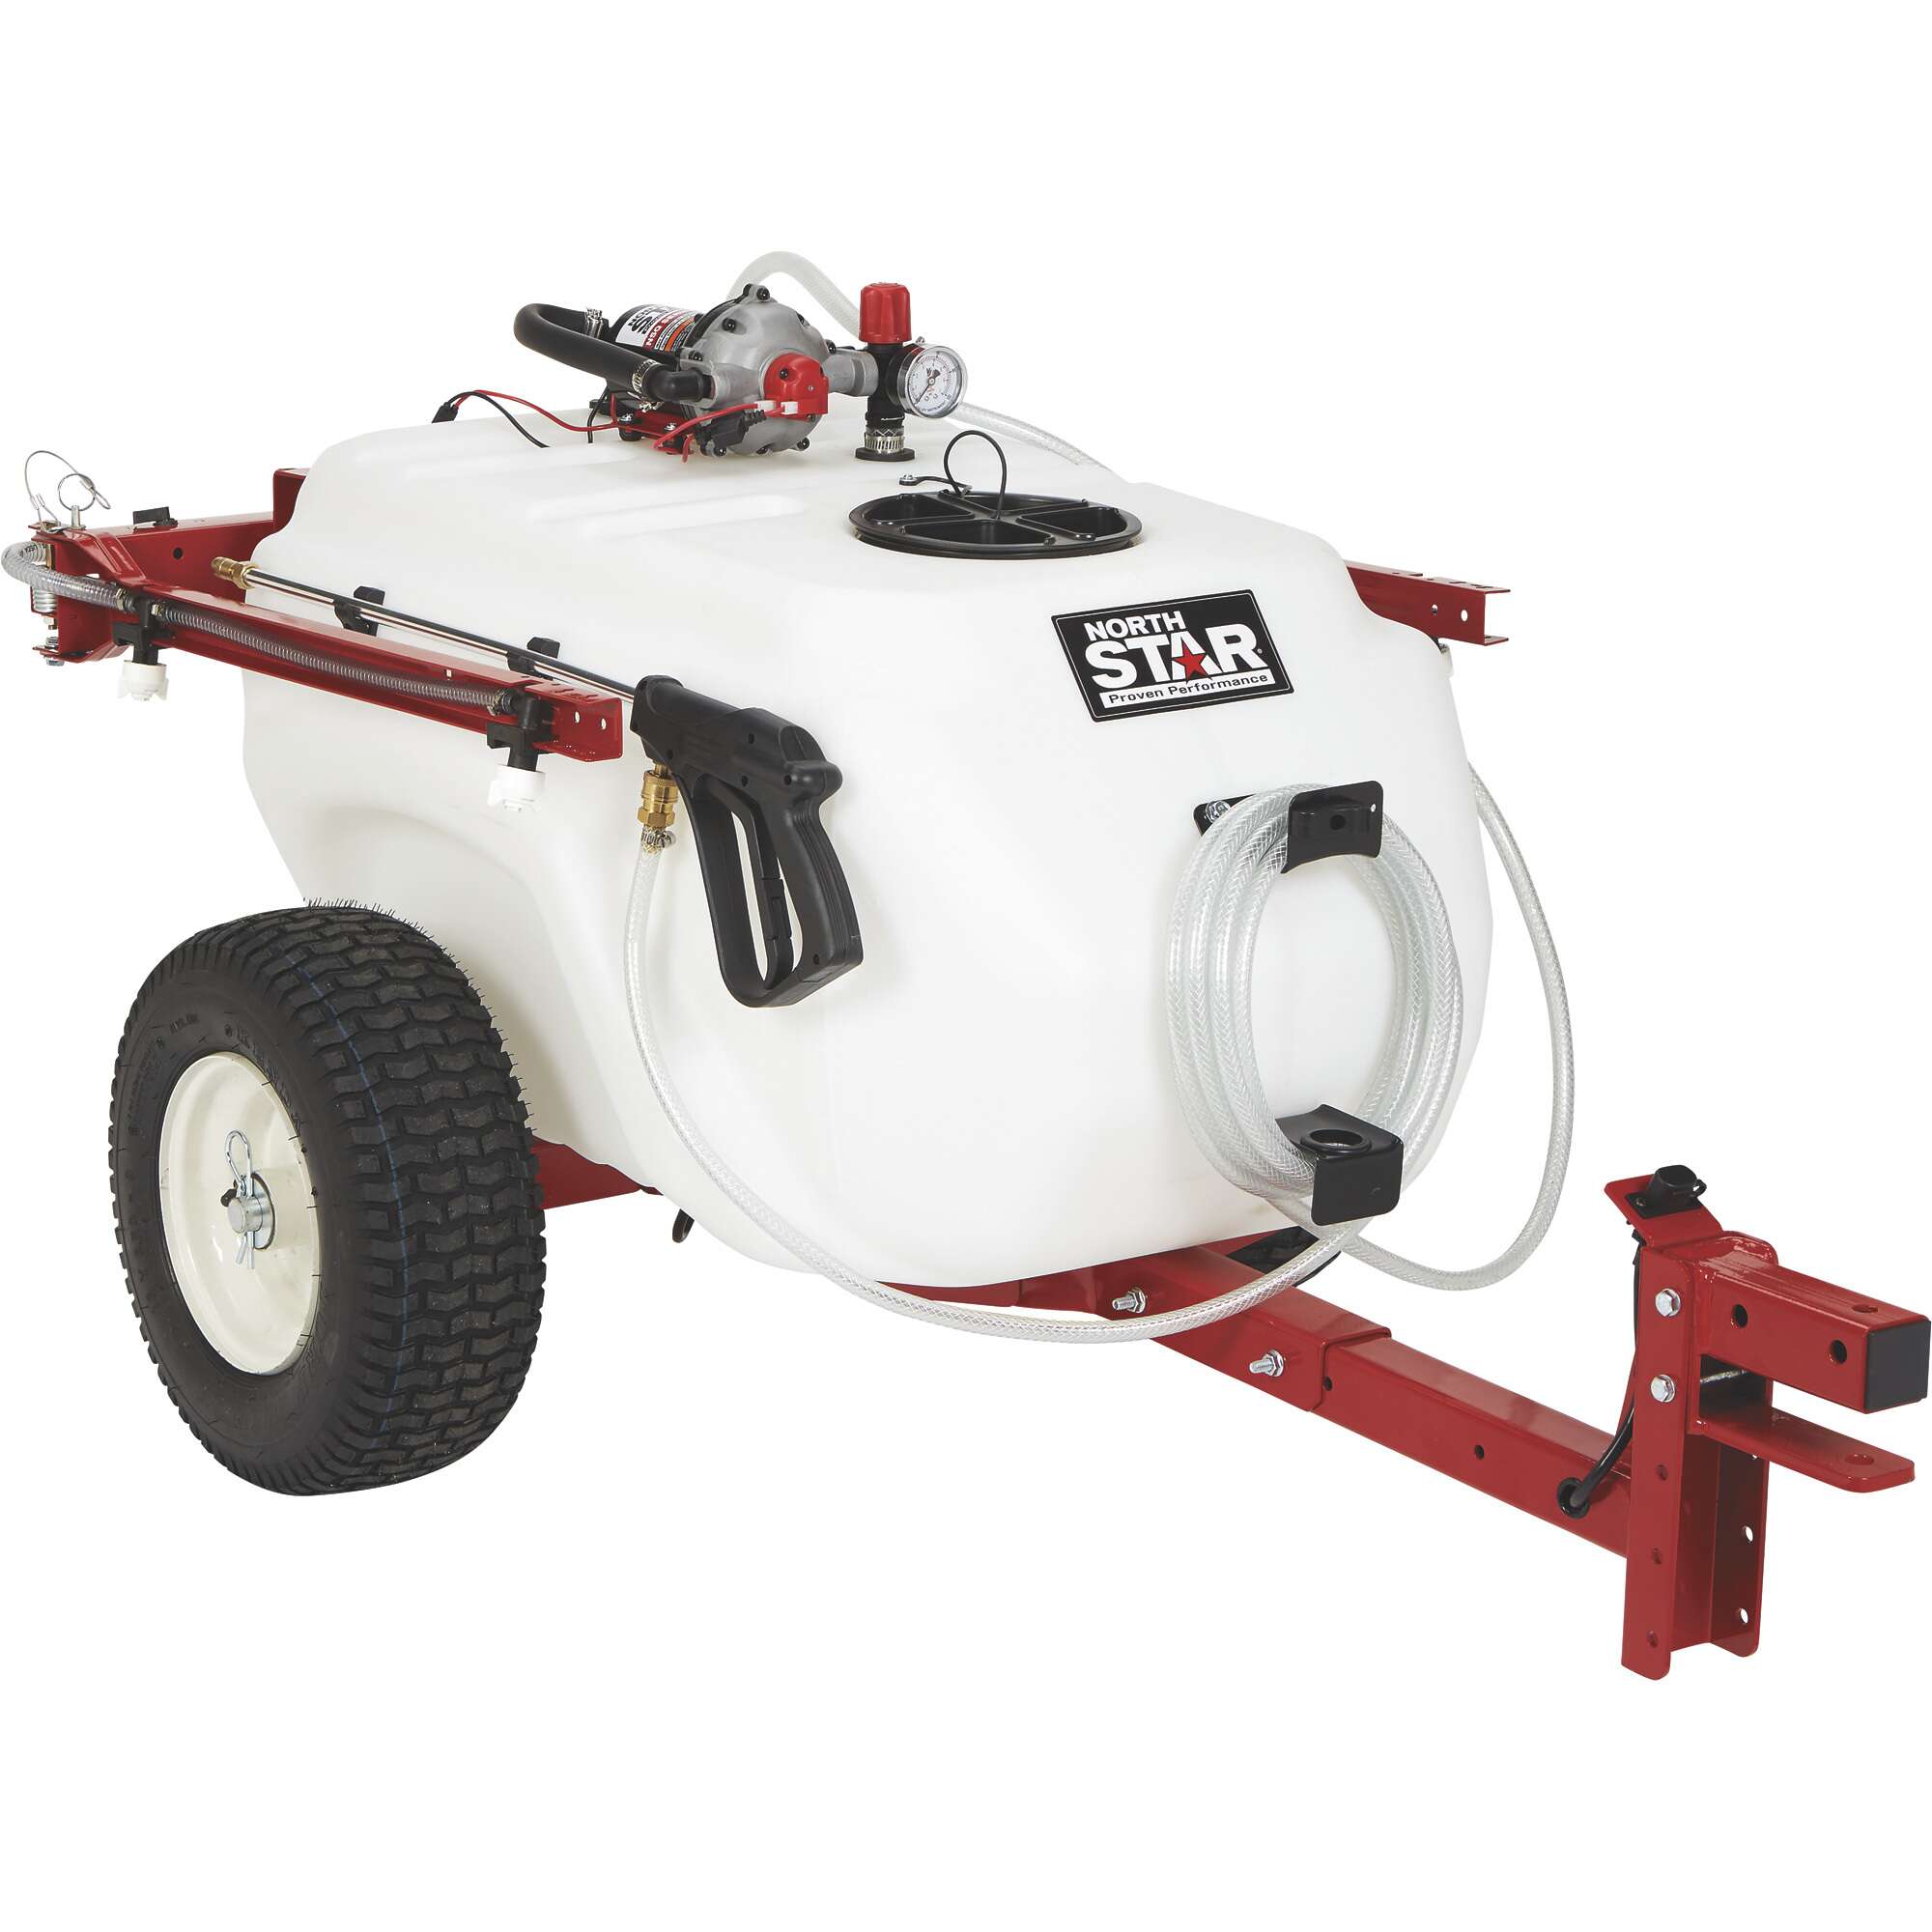 NorthStar Tow Behind Trailer Boom Broadcast and Spot Sprayer 41 Gallon Capacity 4.0 GPM 12V DC